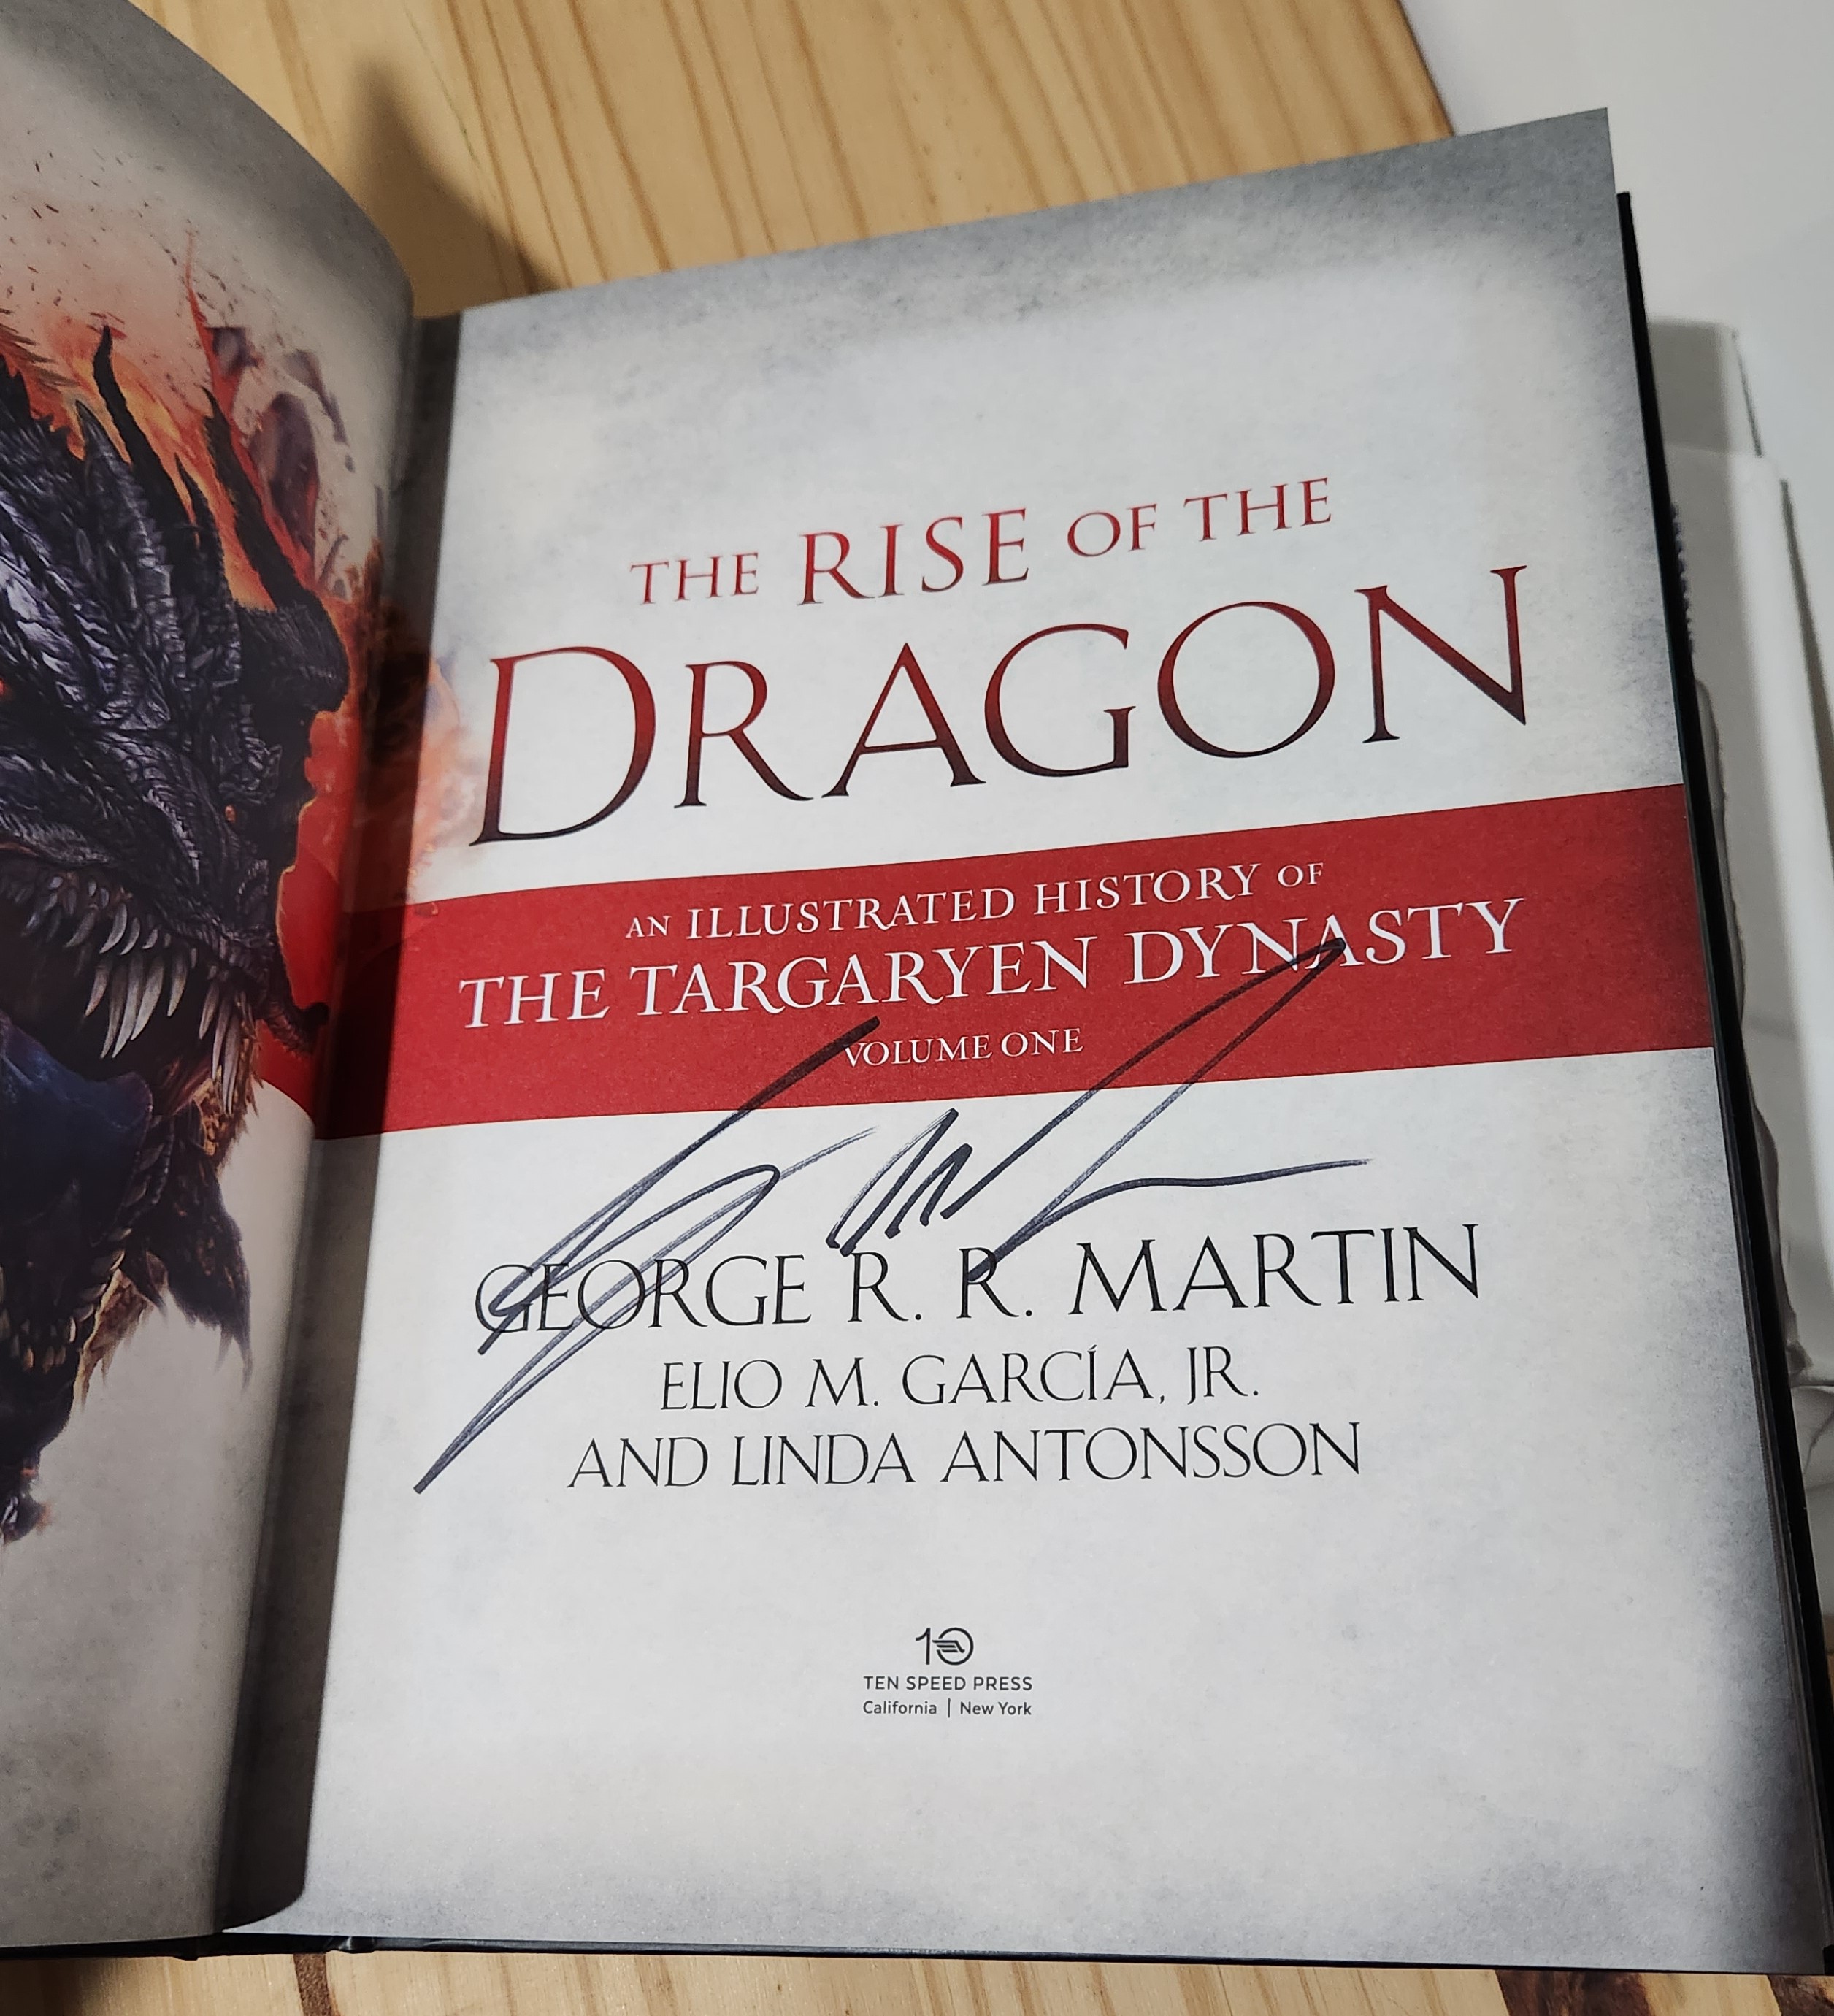 The Rise of the Dragon: An Illustrated History of the Targaryen Dynasty,  Volume One (The Targaryen Dynasty: The House of the Dragon) by Martin,  George R. R.; García Jr, Elio M.; Antonsson